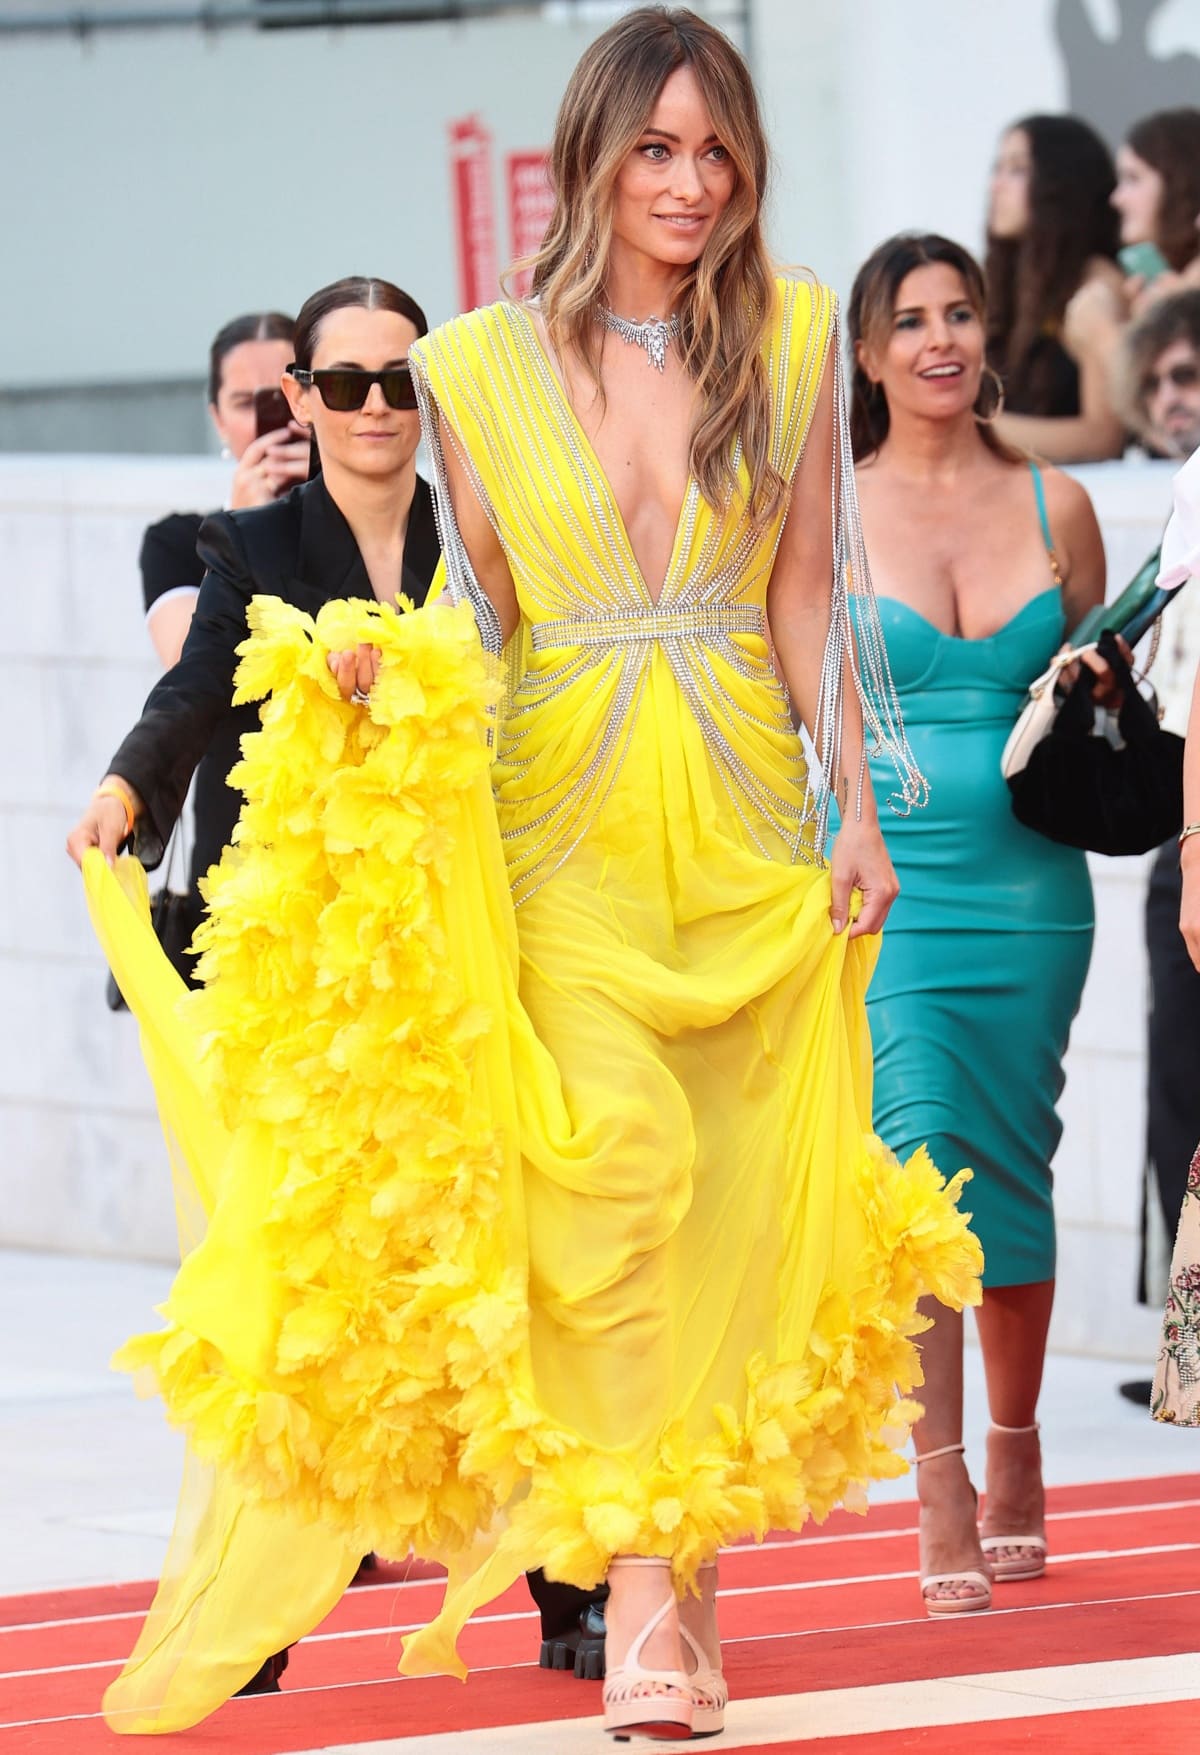 Olivia Wilde wearing strappy heels with her custom yellow Gucci gown